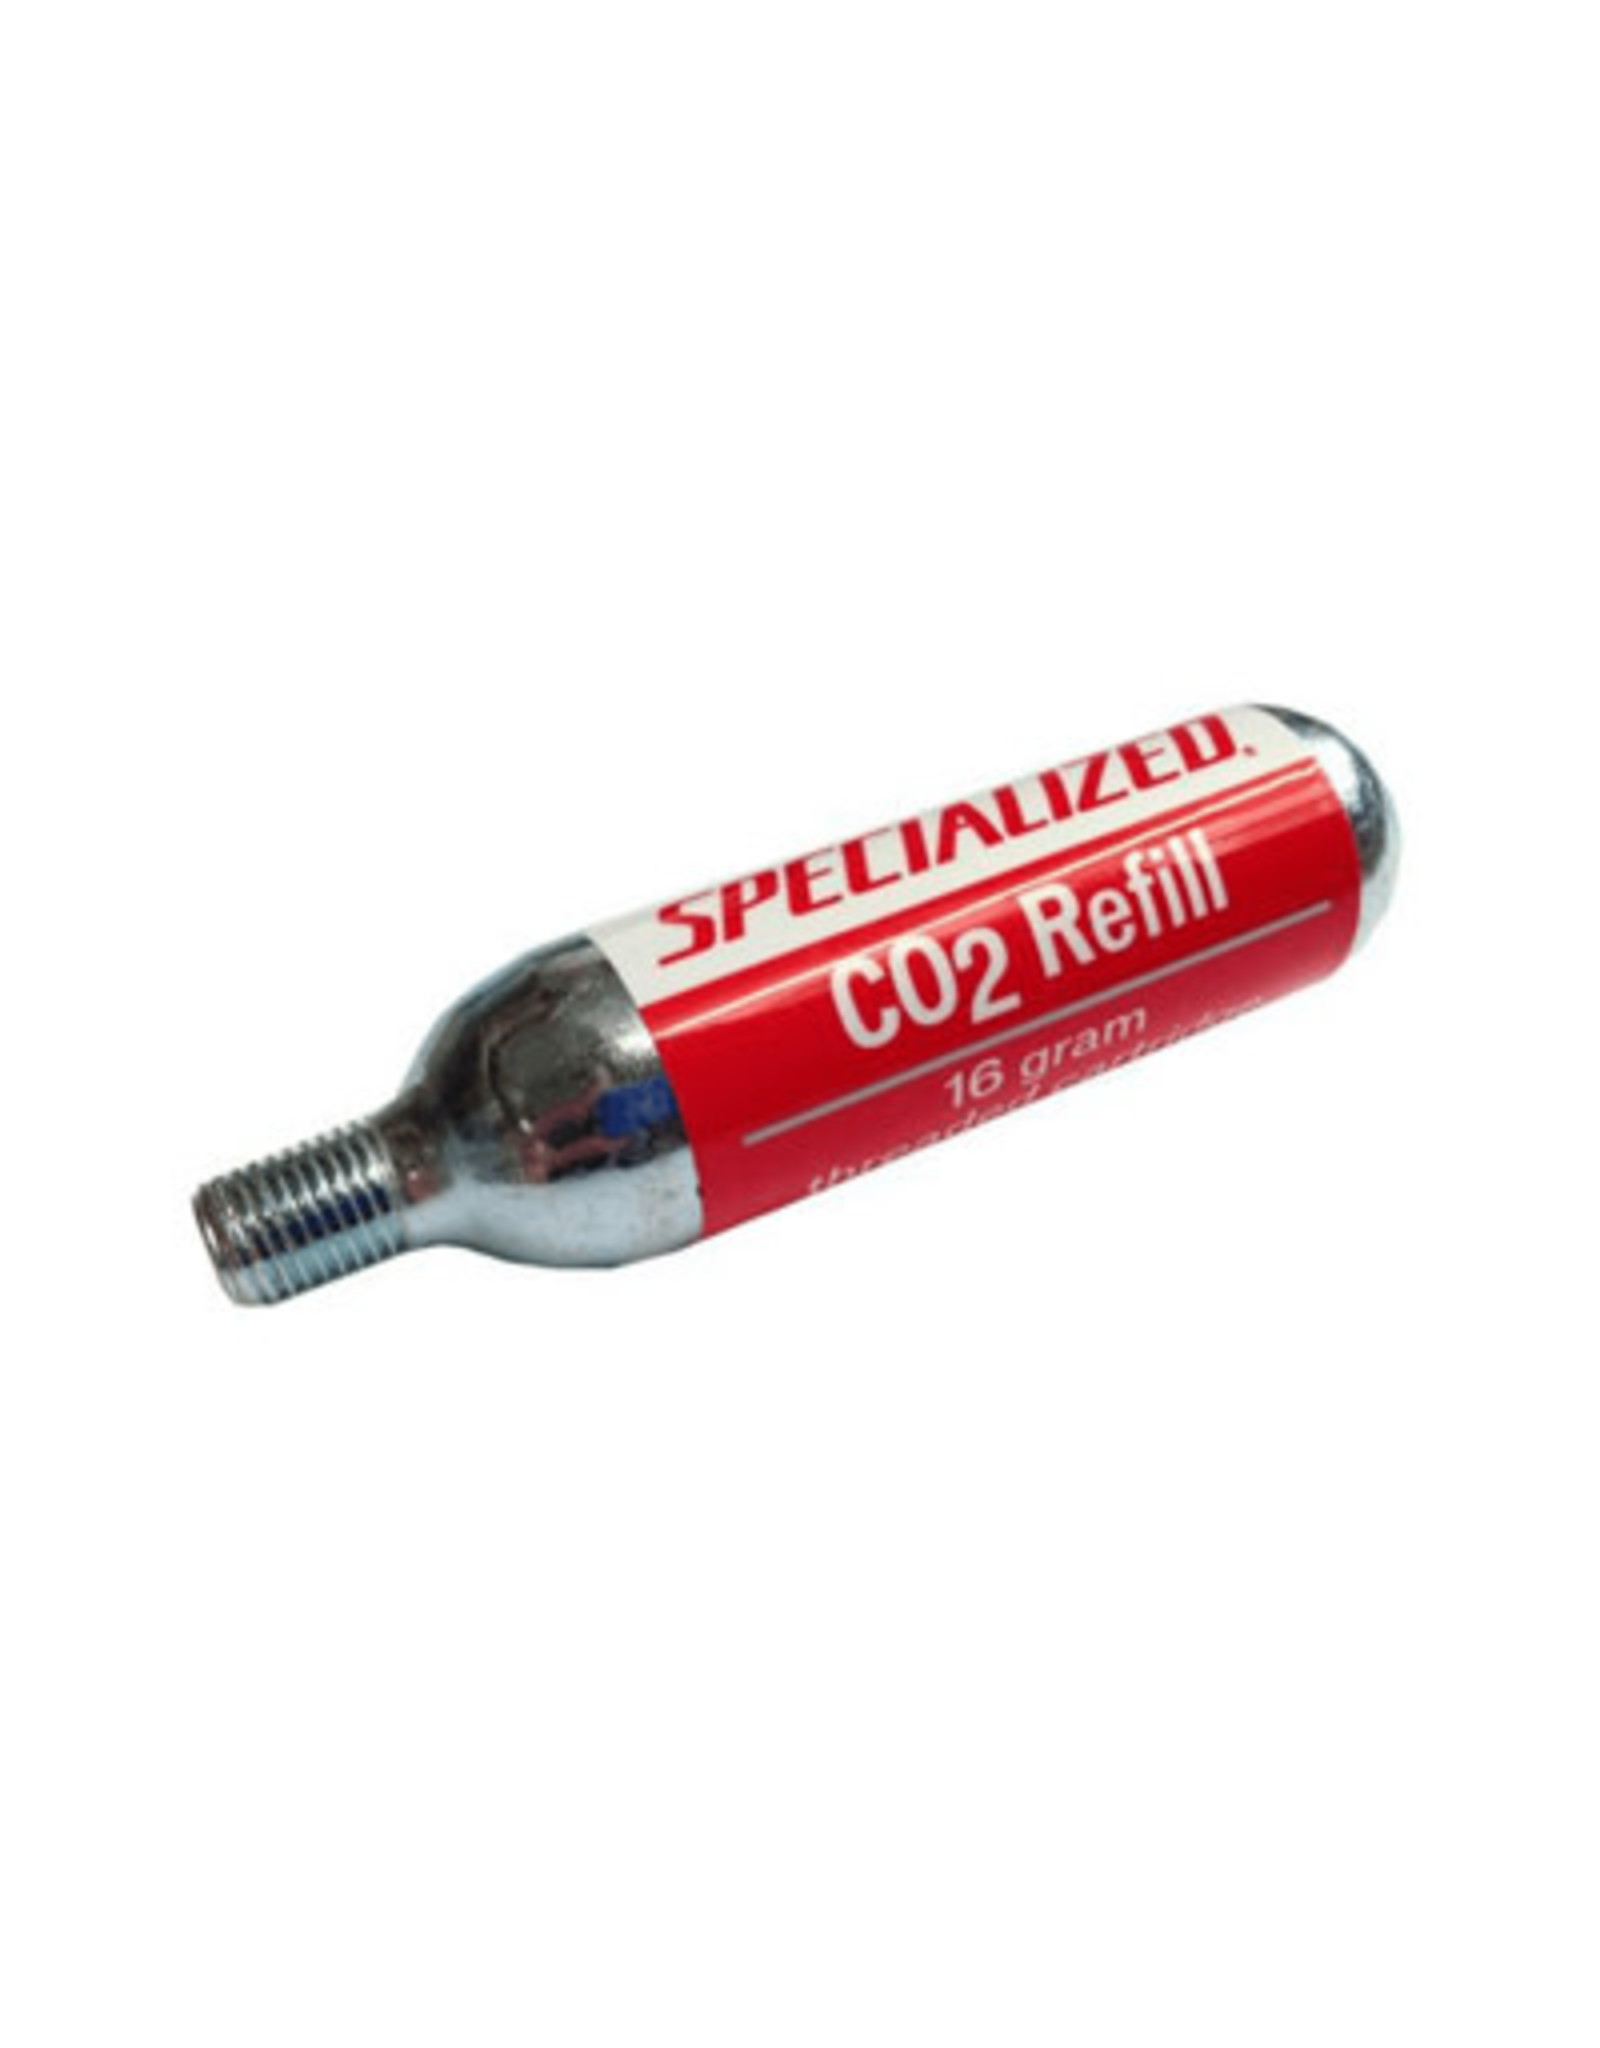 Specialized Specialized CO2 Cannister 25g